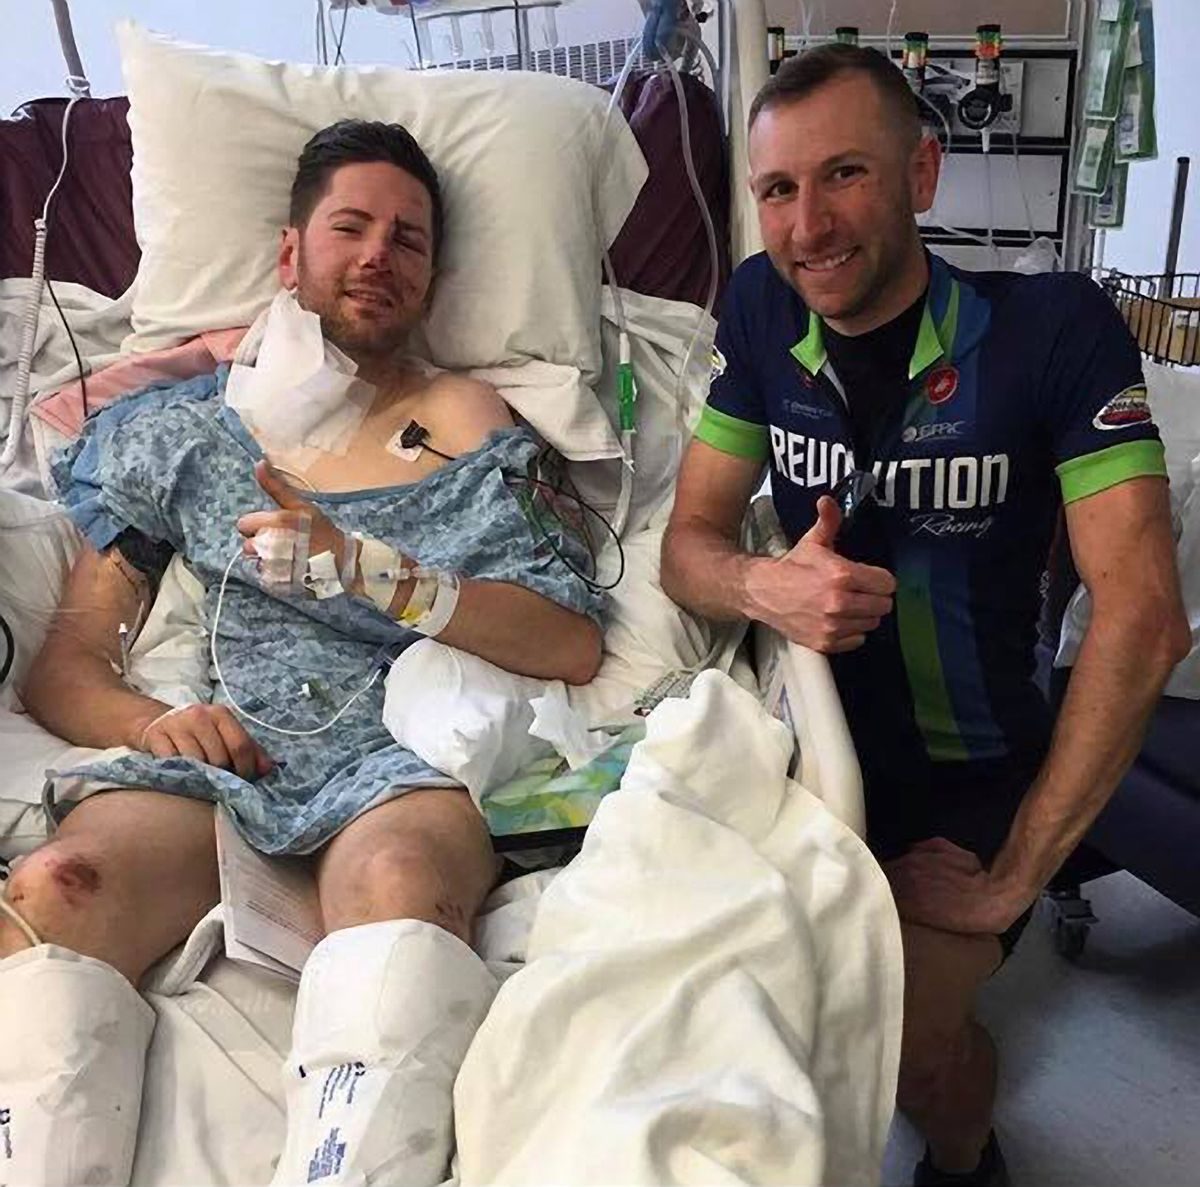 James Fredrick credits his friend Alex Ippoliti for saving his life when a brown bear attacked him Saturday morning as the two biked on a gravel road on Joint Base Elmendorf-Richardson.